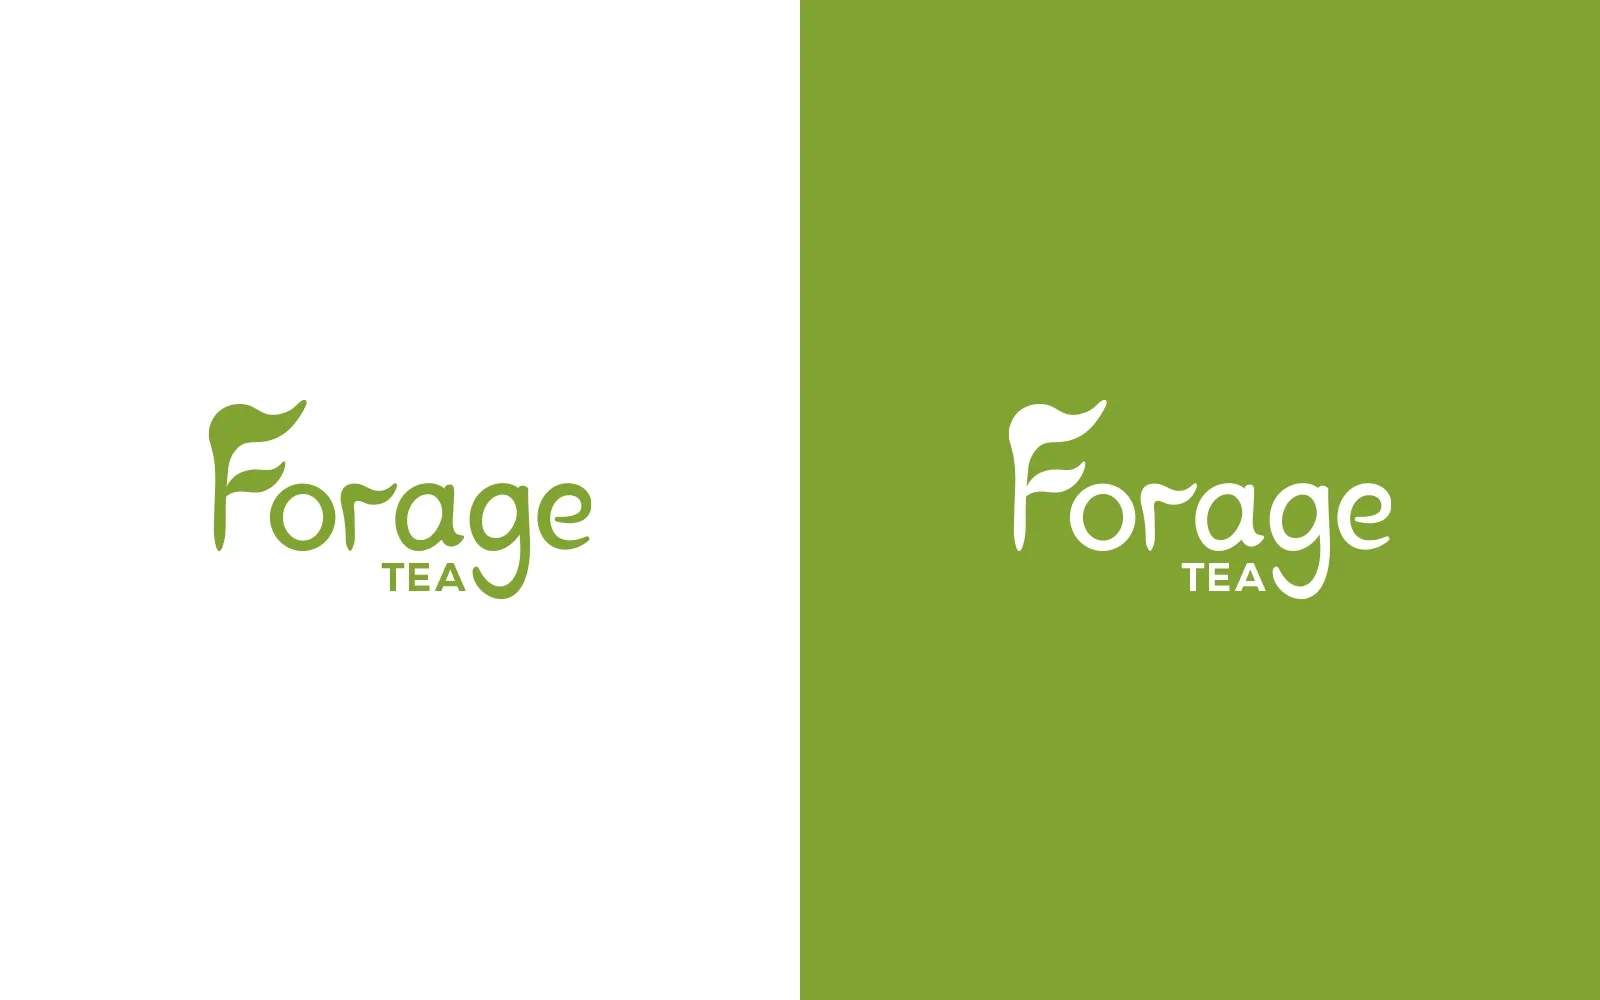 The Forage Tea logo split into two versions, one with the logo in green on a white background, the other is white on a green background